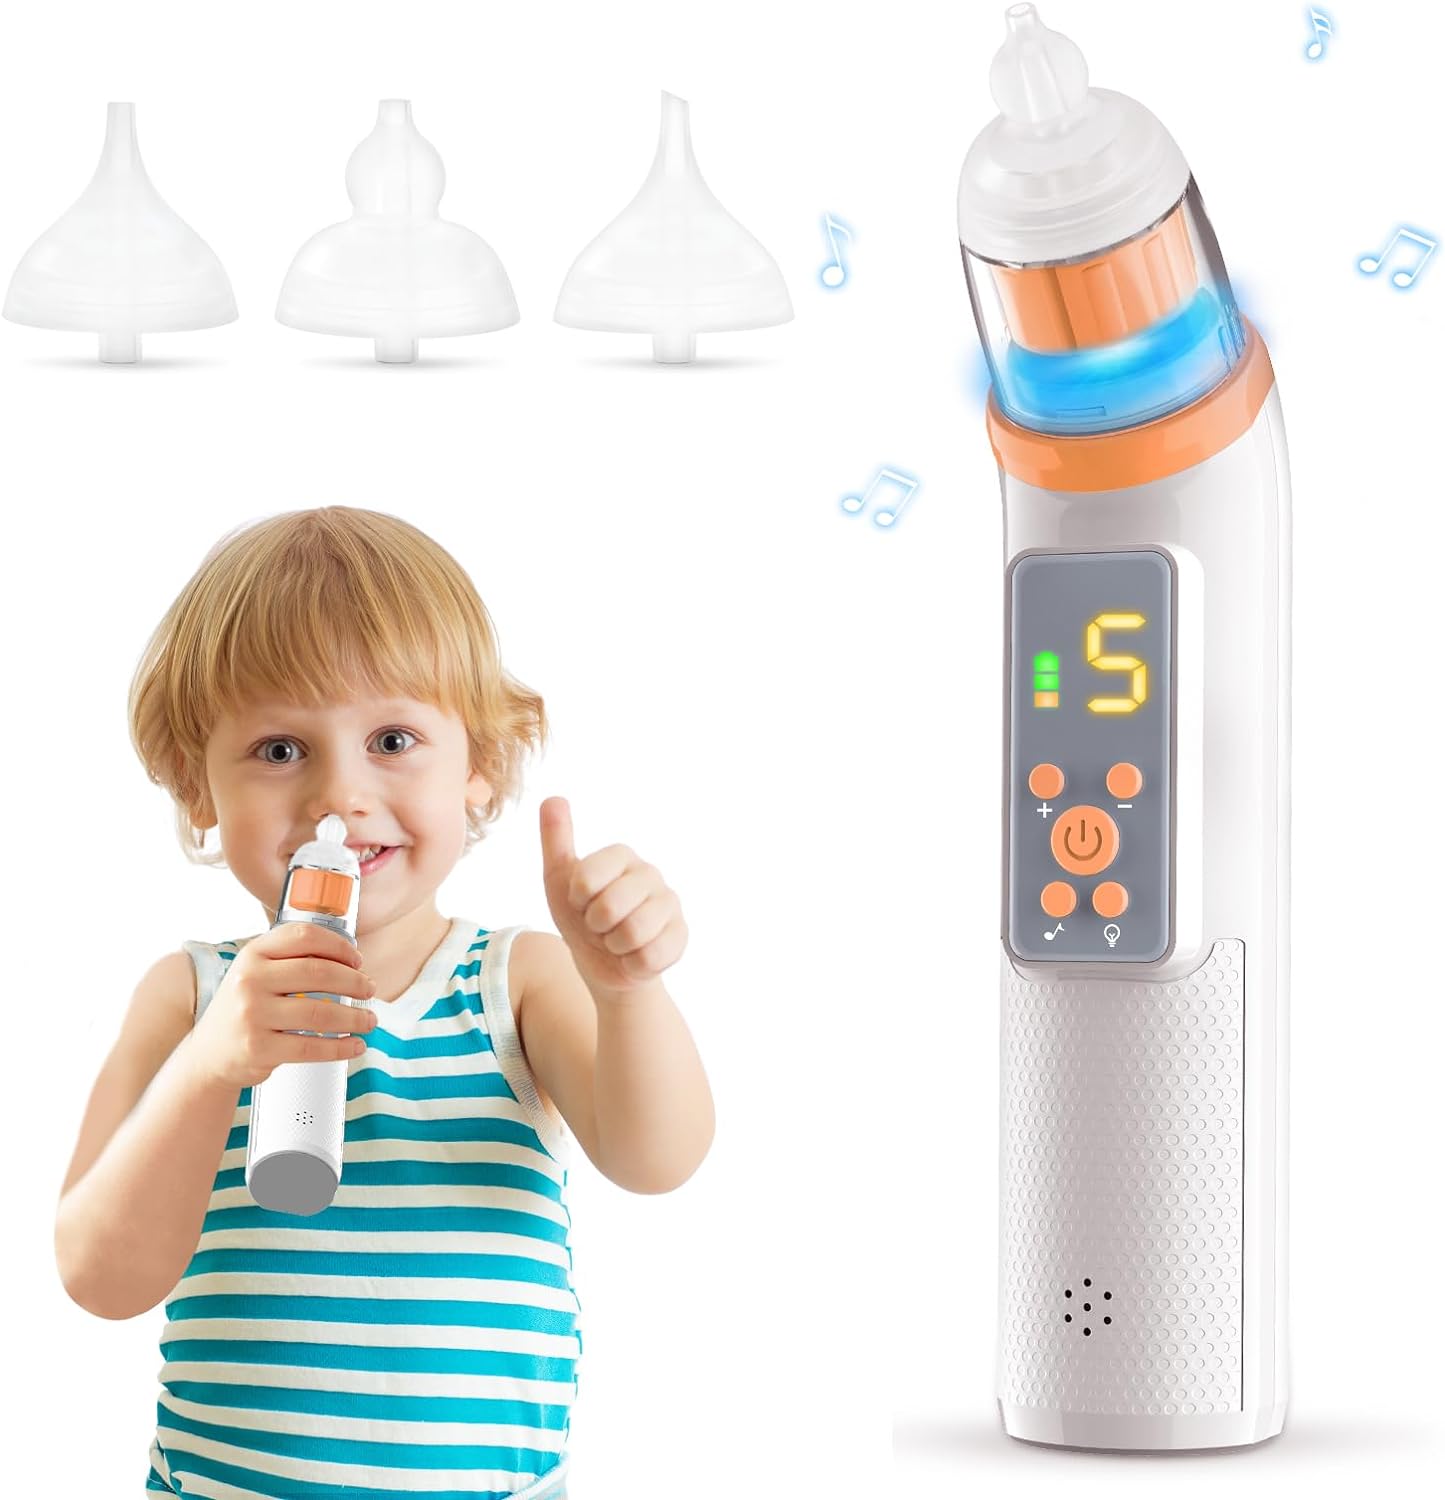 Nasal Aspirator for Baby,Electric Nose Suction for Baby Nose Sucker ,Rechargeable Nose Cleaner for Toddler with 5 Suction Levels,Waterproof Nose Aspirator with Music Light Function, Orange